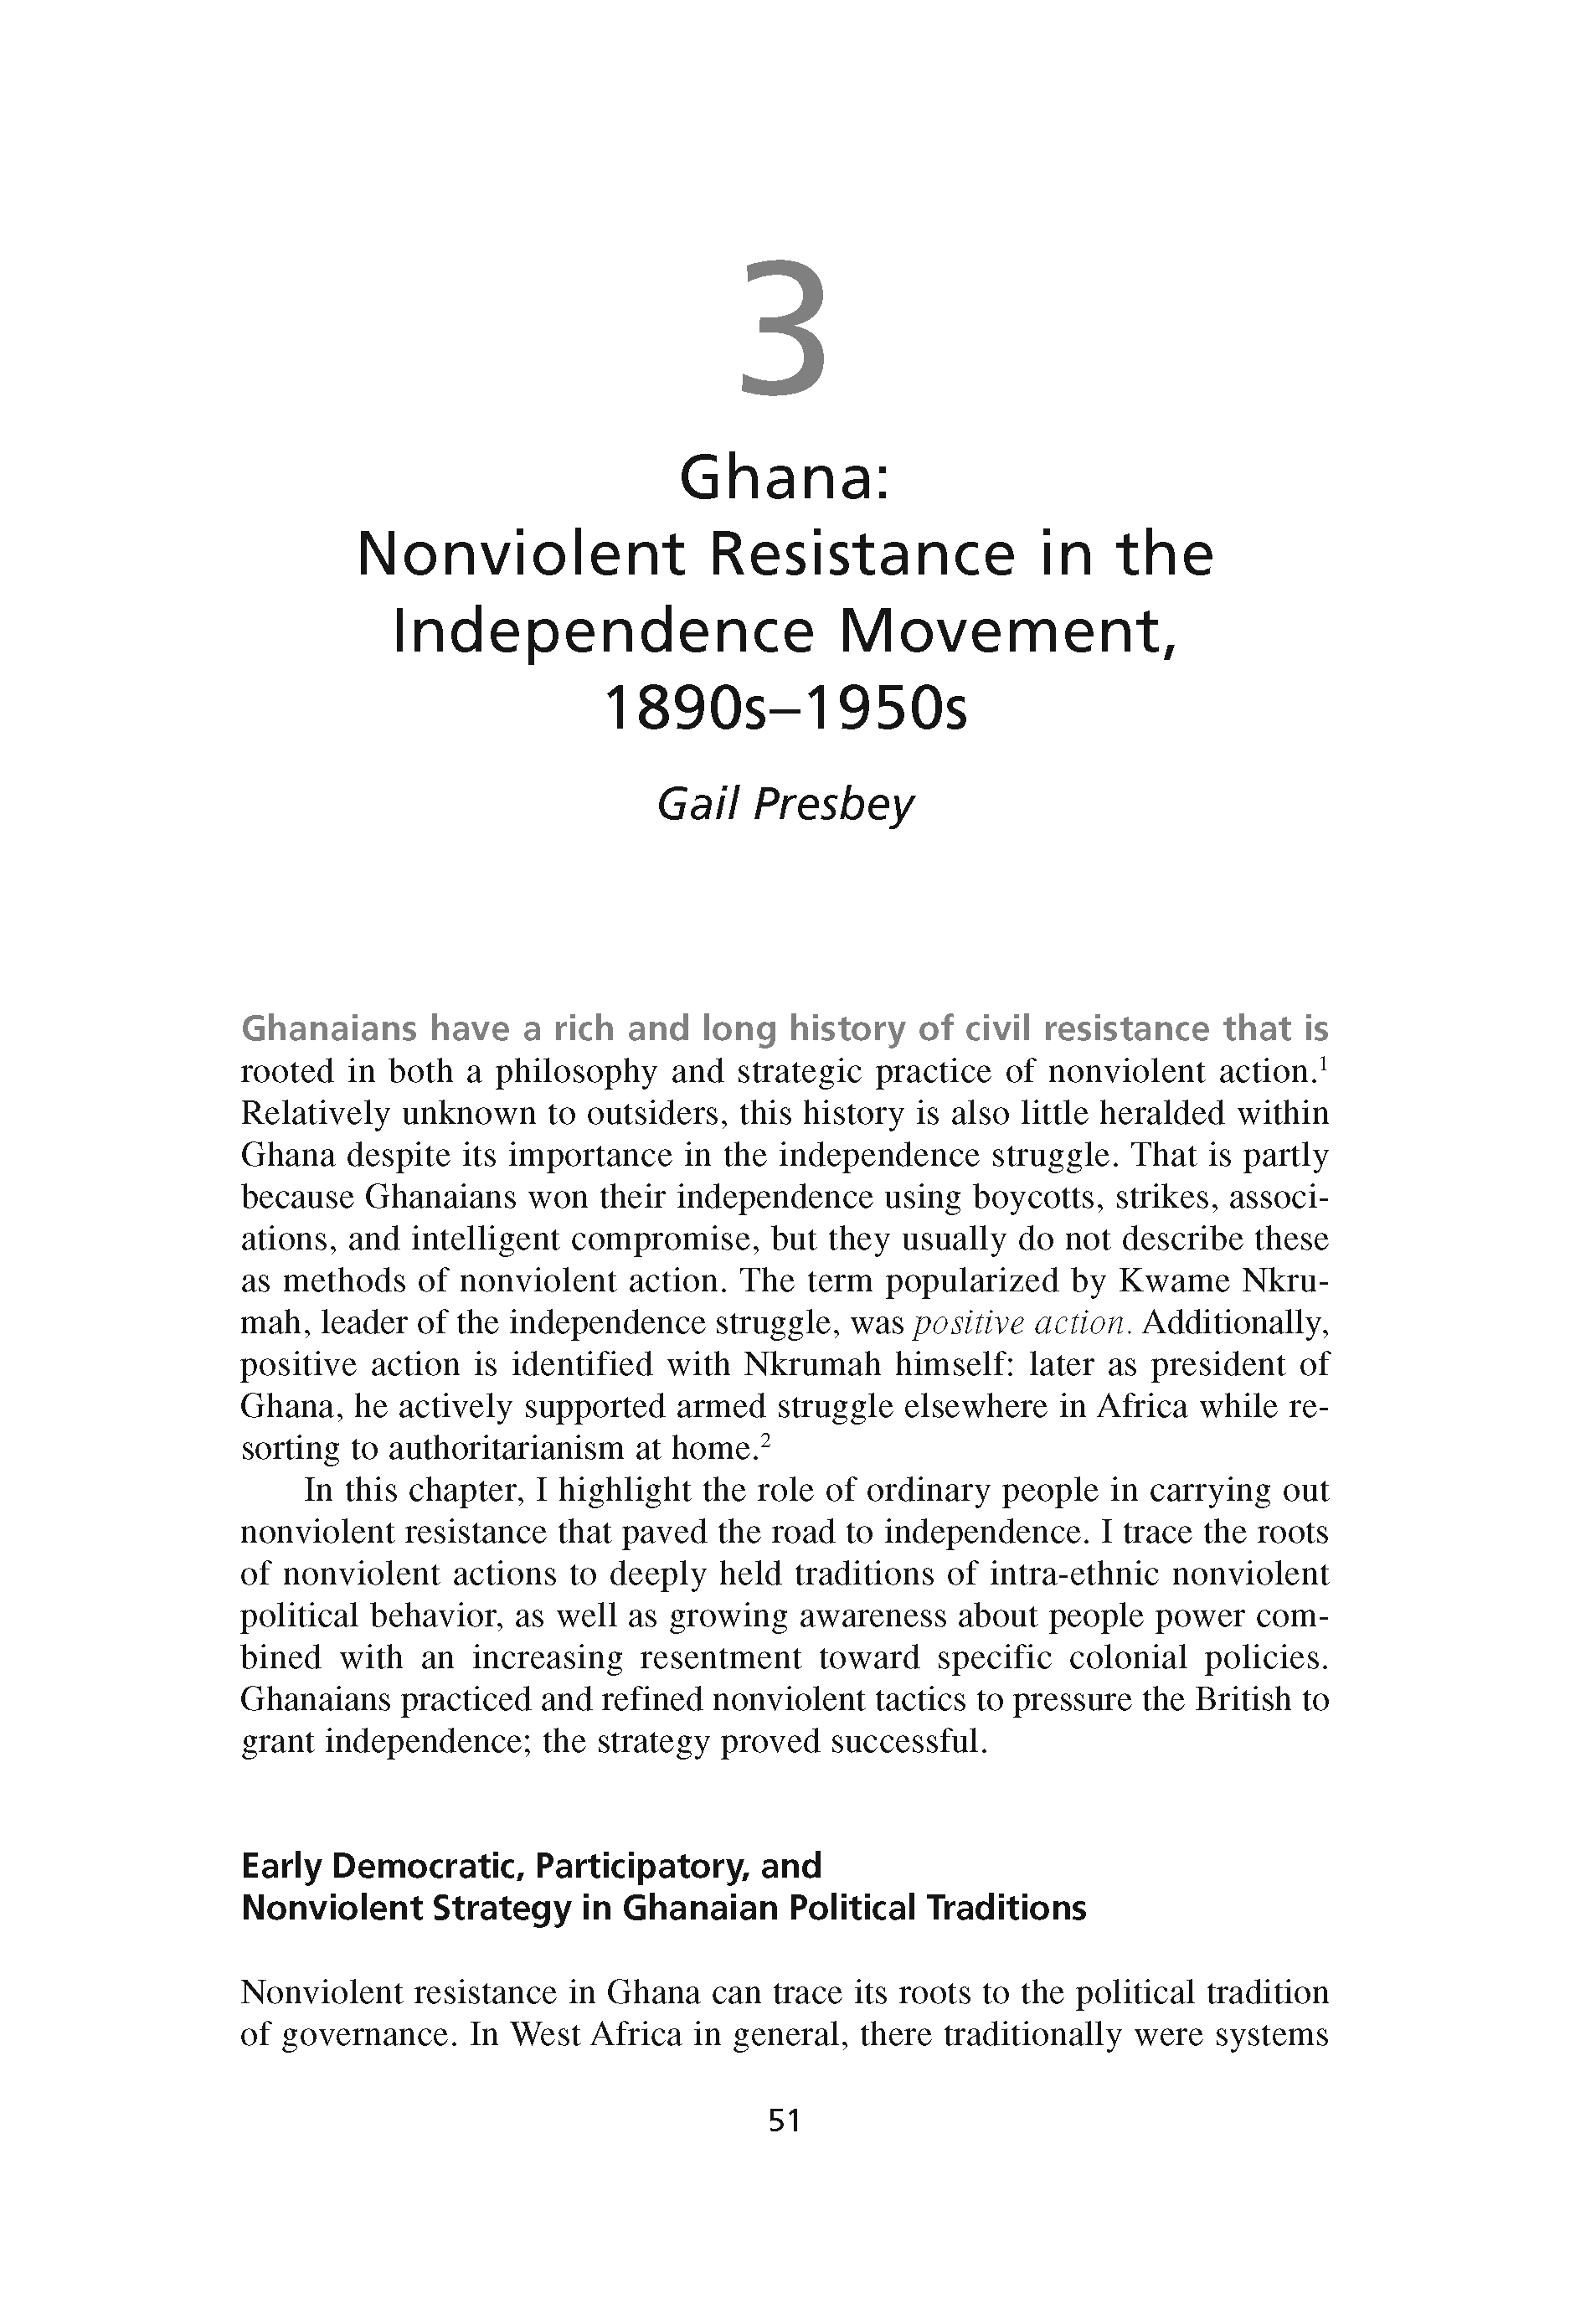 Ghana: Nonviolent Resistance in the Independence Movement, 1890s-1950s (Chapter 3 from ‘Recovering Nonviolent History’)